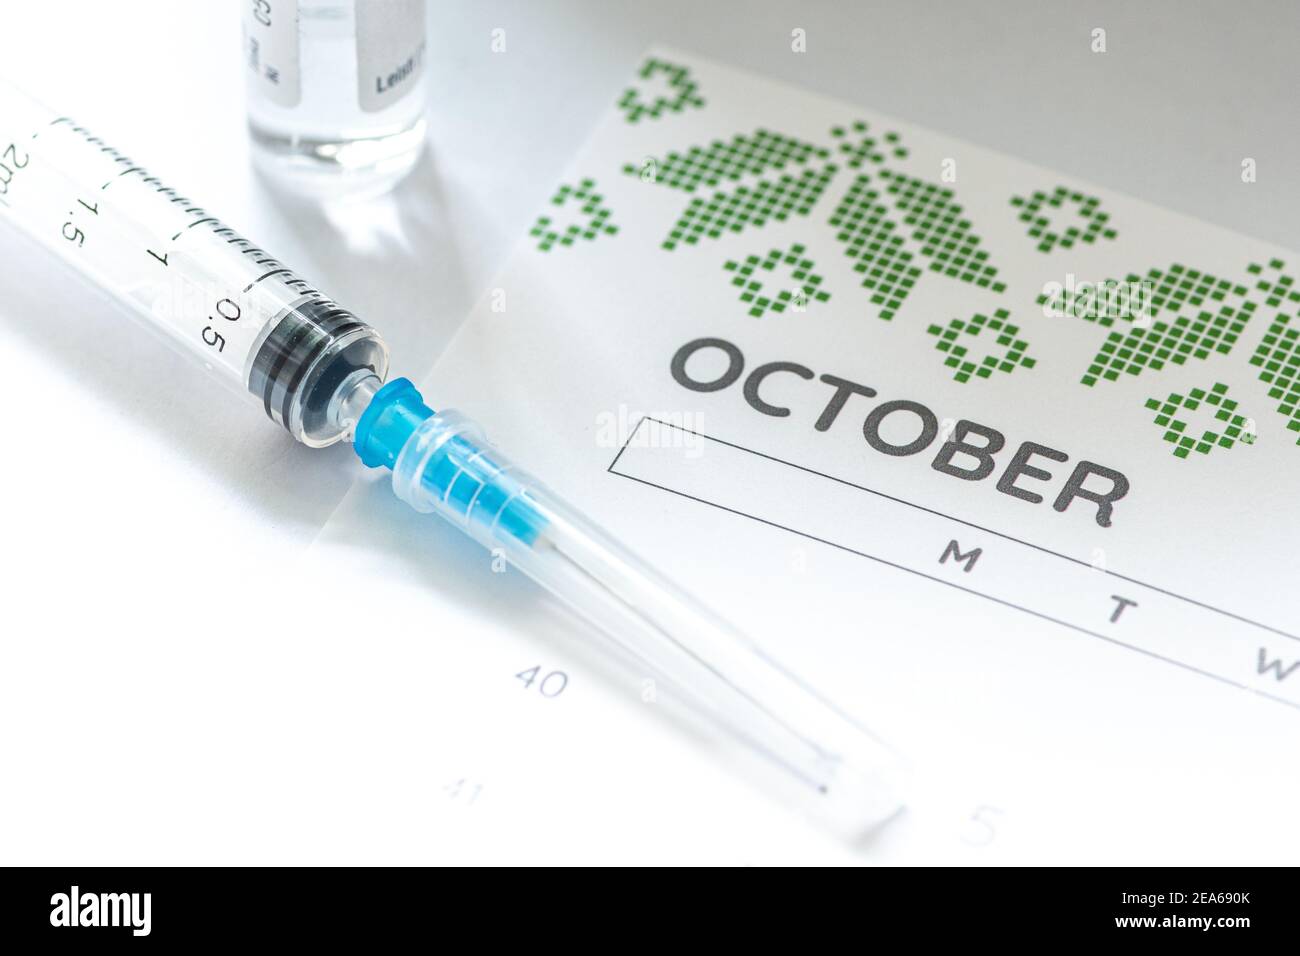 Syringe, glass vial or phial and calendar with month of October on a white table ready to be used. Covid or Coronavirus vaccine background, close up Stock Photo